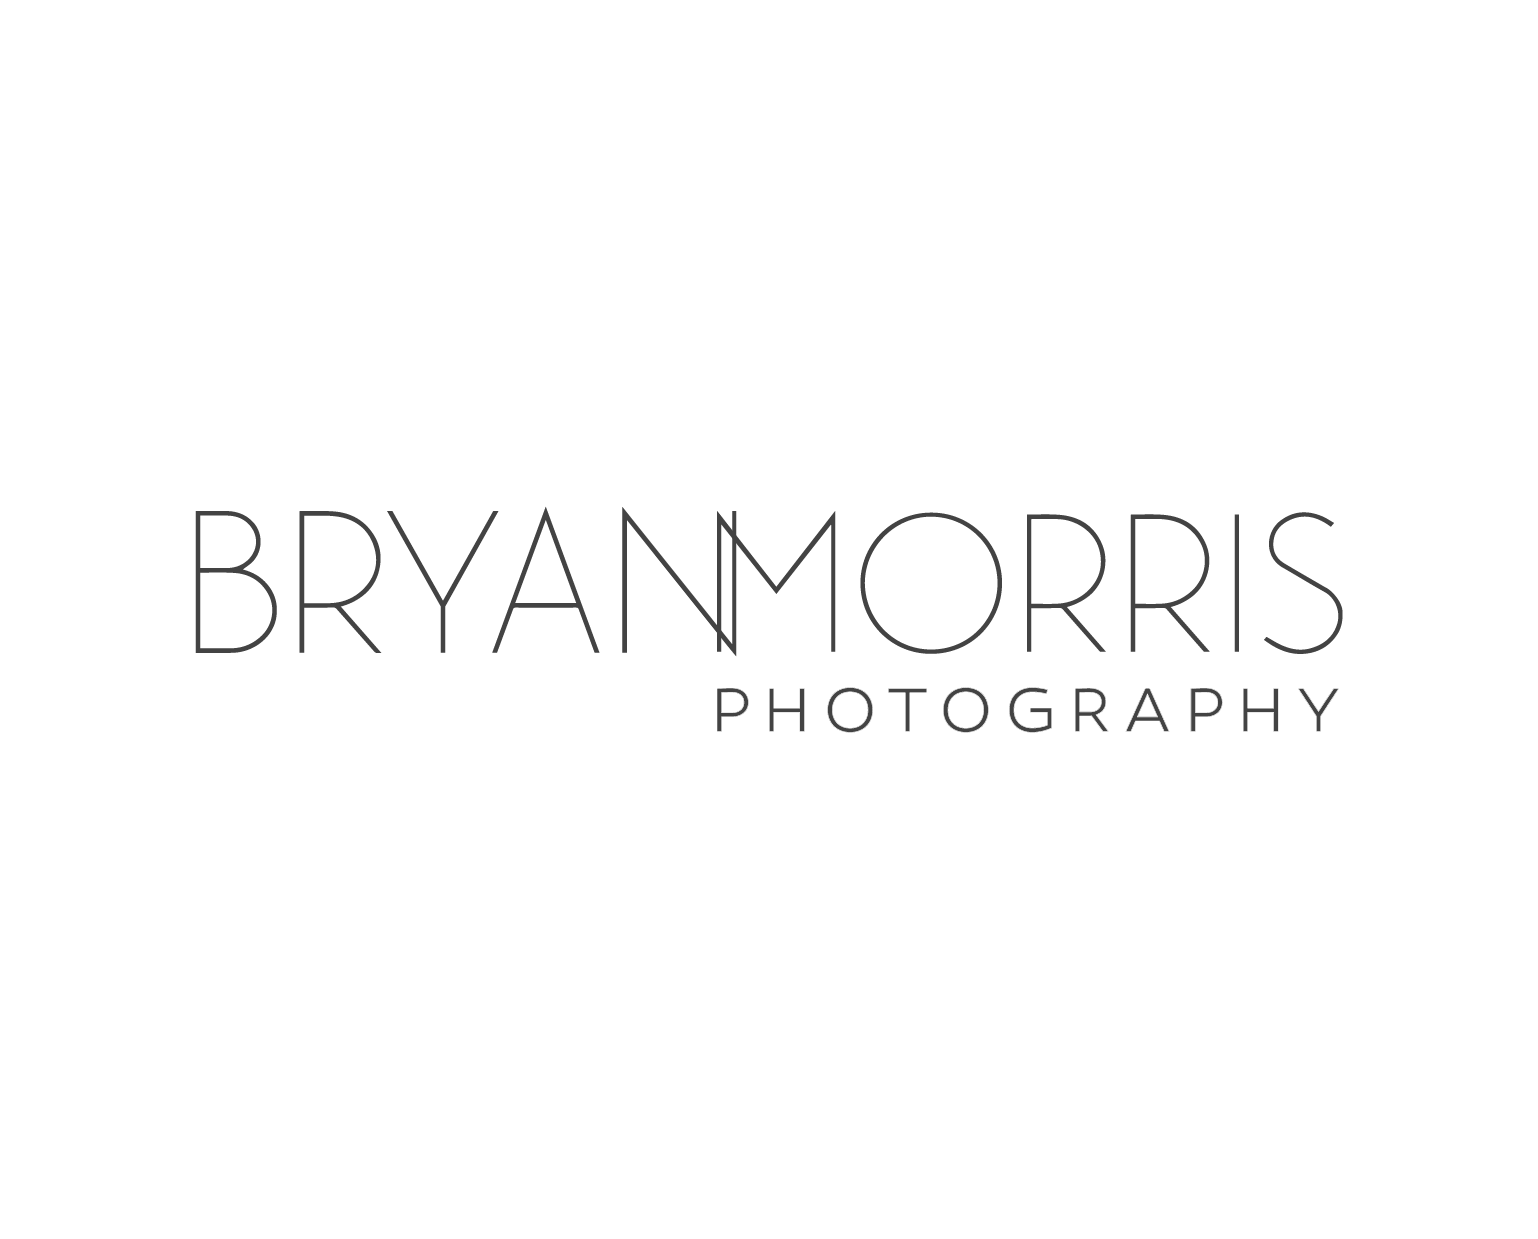 Bryan Morris Photography - Brand strategy and logo design